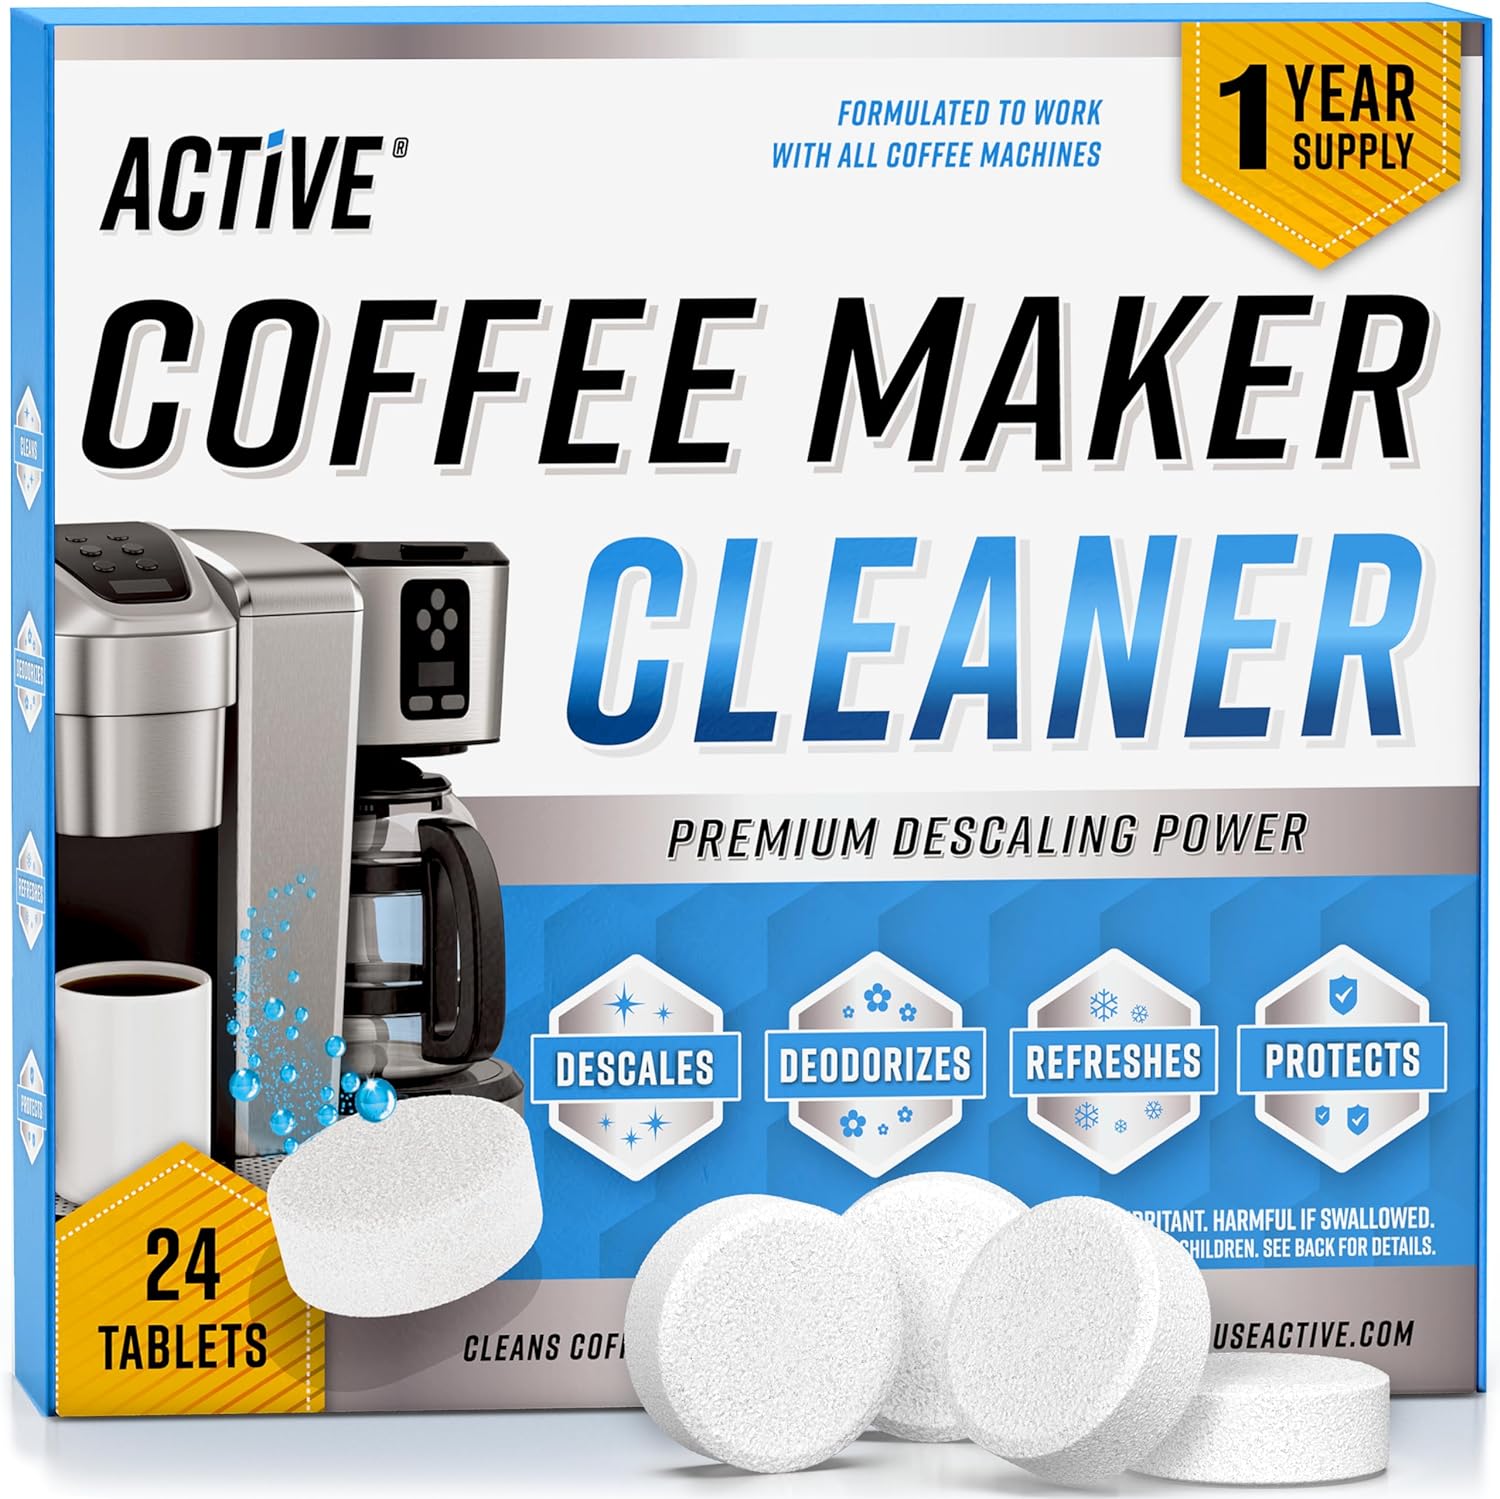 These are effervescent tablets, so need to pay for water and bottles. There are 12 tablets, so 10 treatments for my Keurig single-cup coffee maker. Just pop one tablet into a full water tank and run the solution through the cleaning cycle. Ill definitely order again when I use these up.